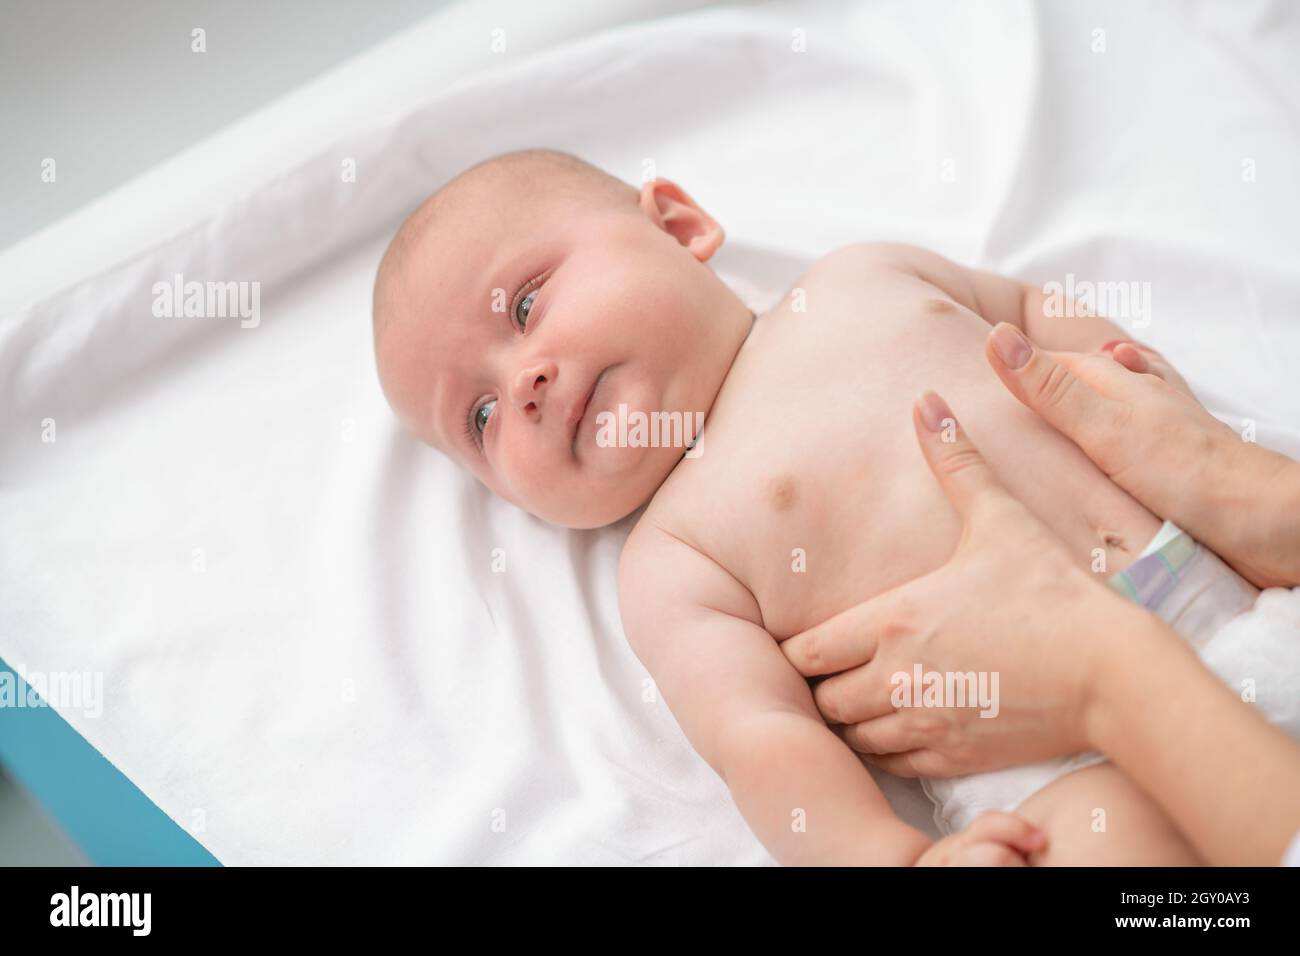 Calm baby undergoing a medical exam in hospital Stock Photo